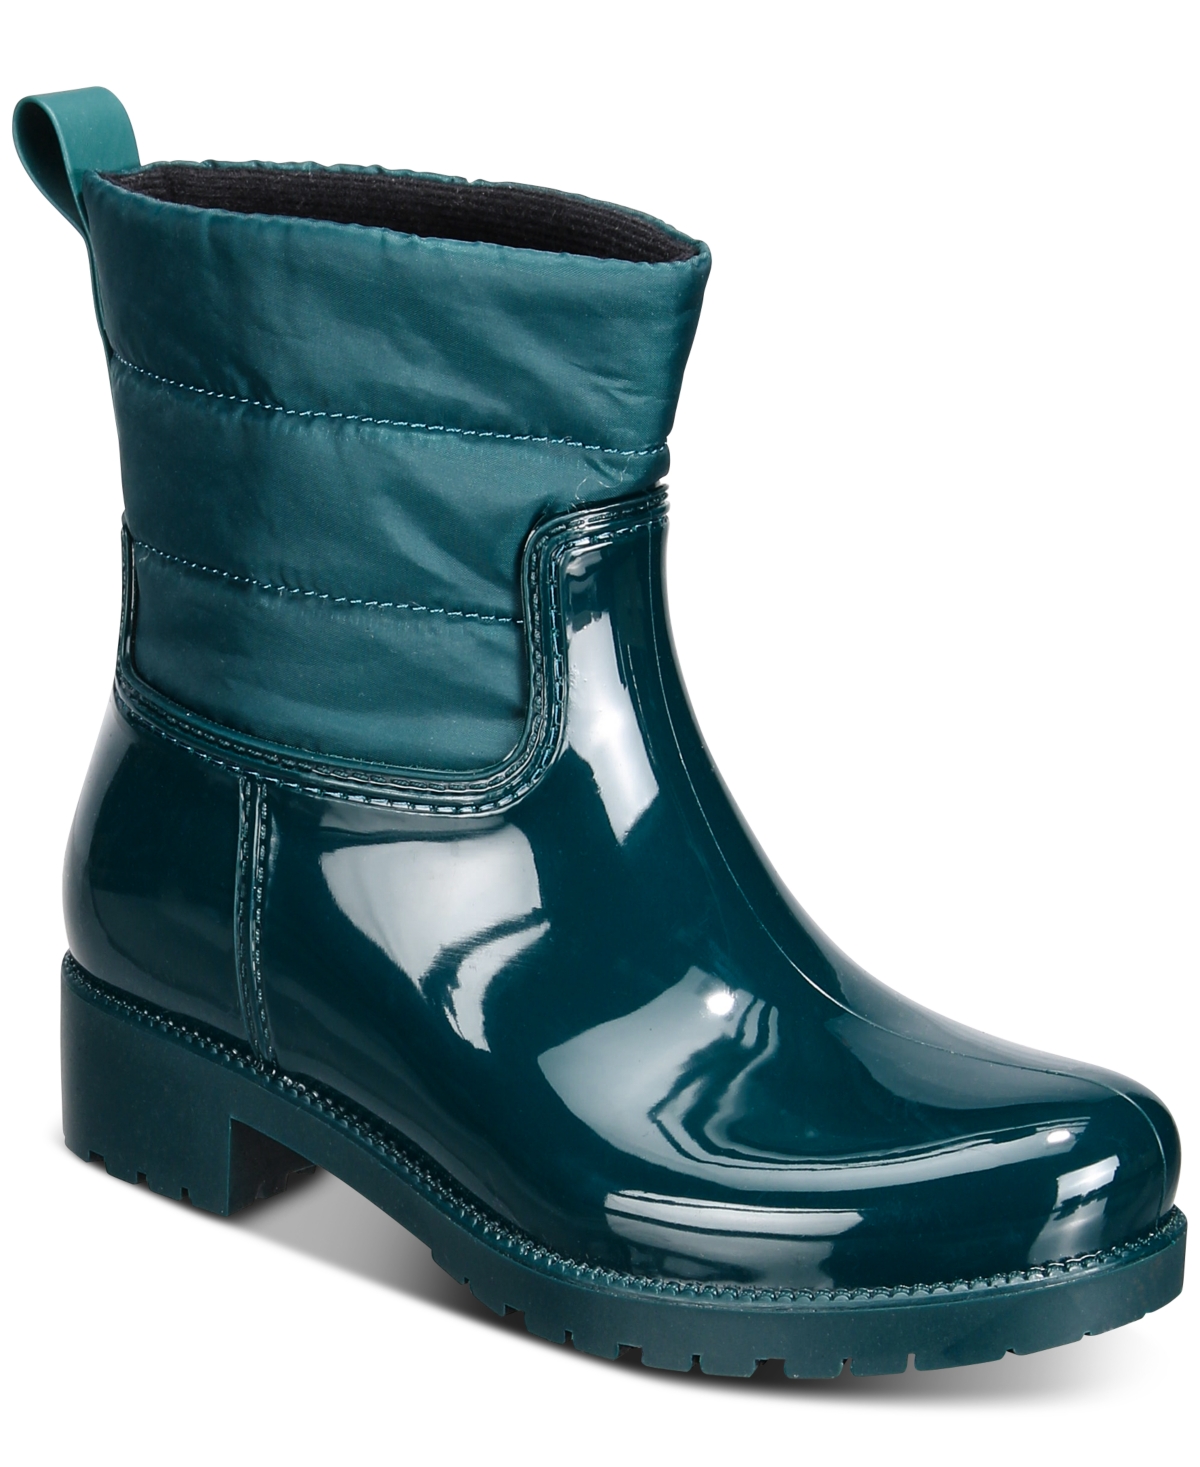 Trudyy Rain Boots, Created for Macy's - Green Puffer